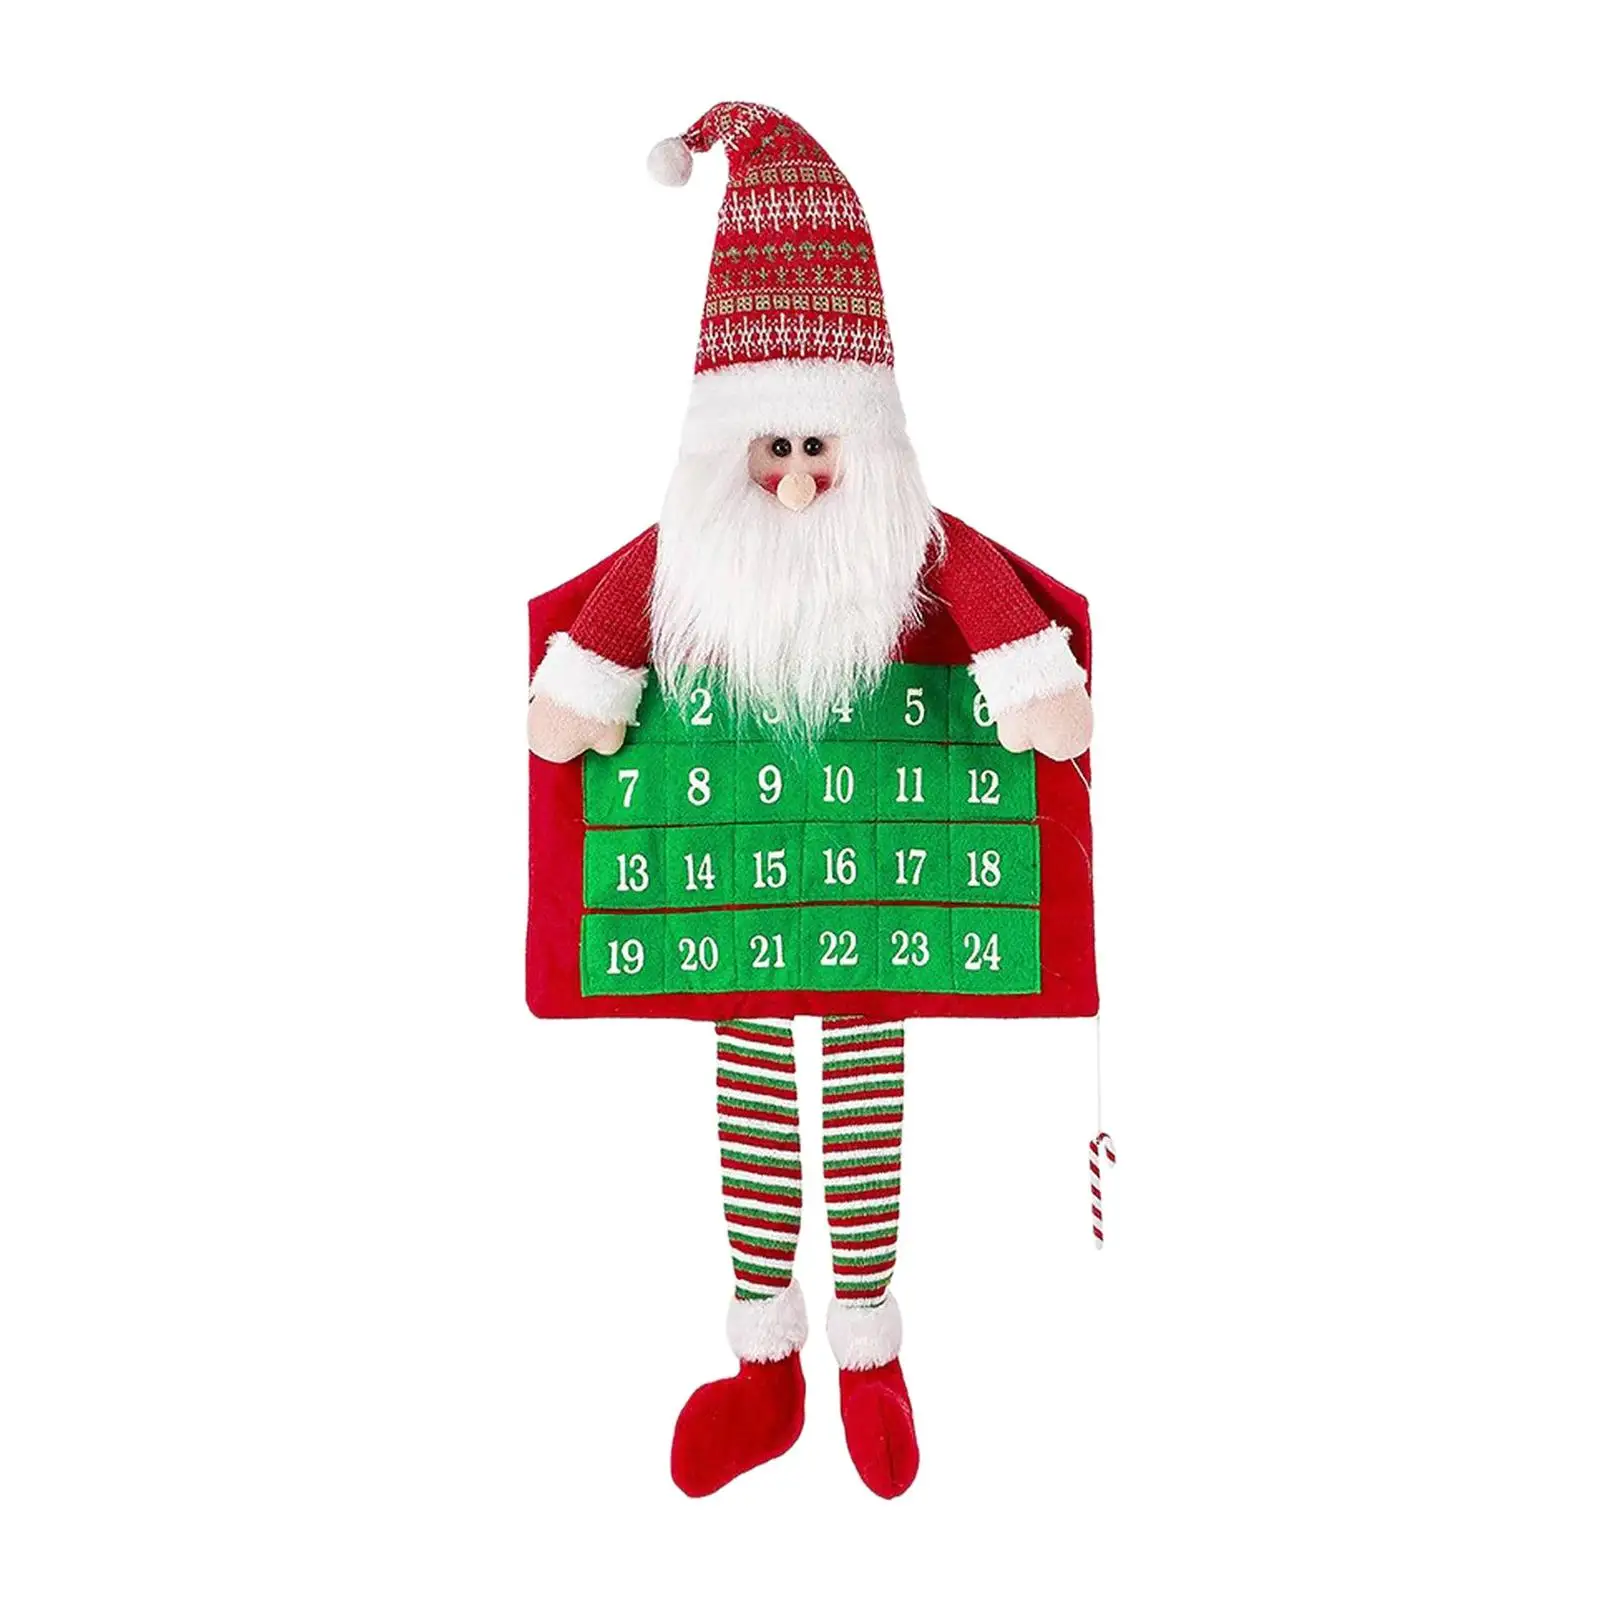 Christmas Hanging Calendar Props Cute Hanging Pendant Advent Calendar Wall Decor for Hotel Holiday Party New Year Kids Gift